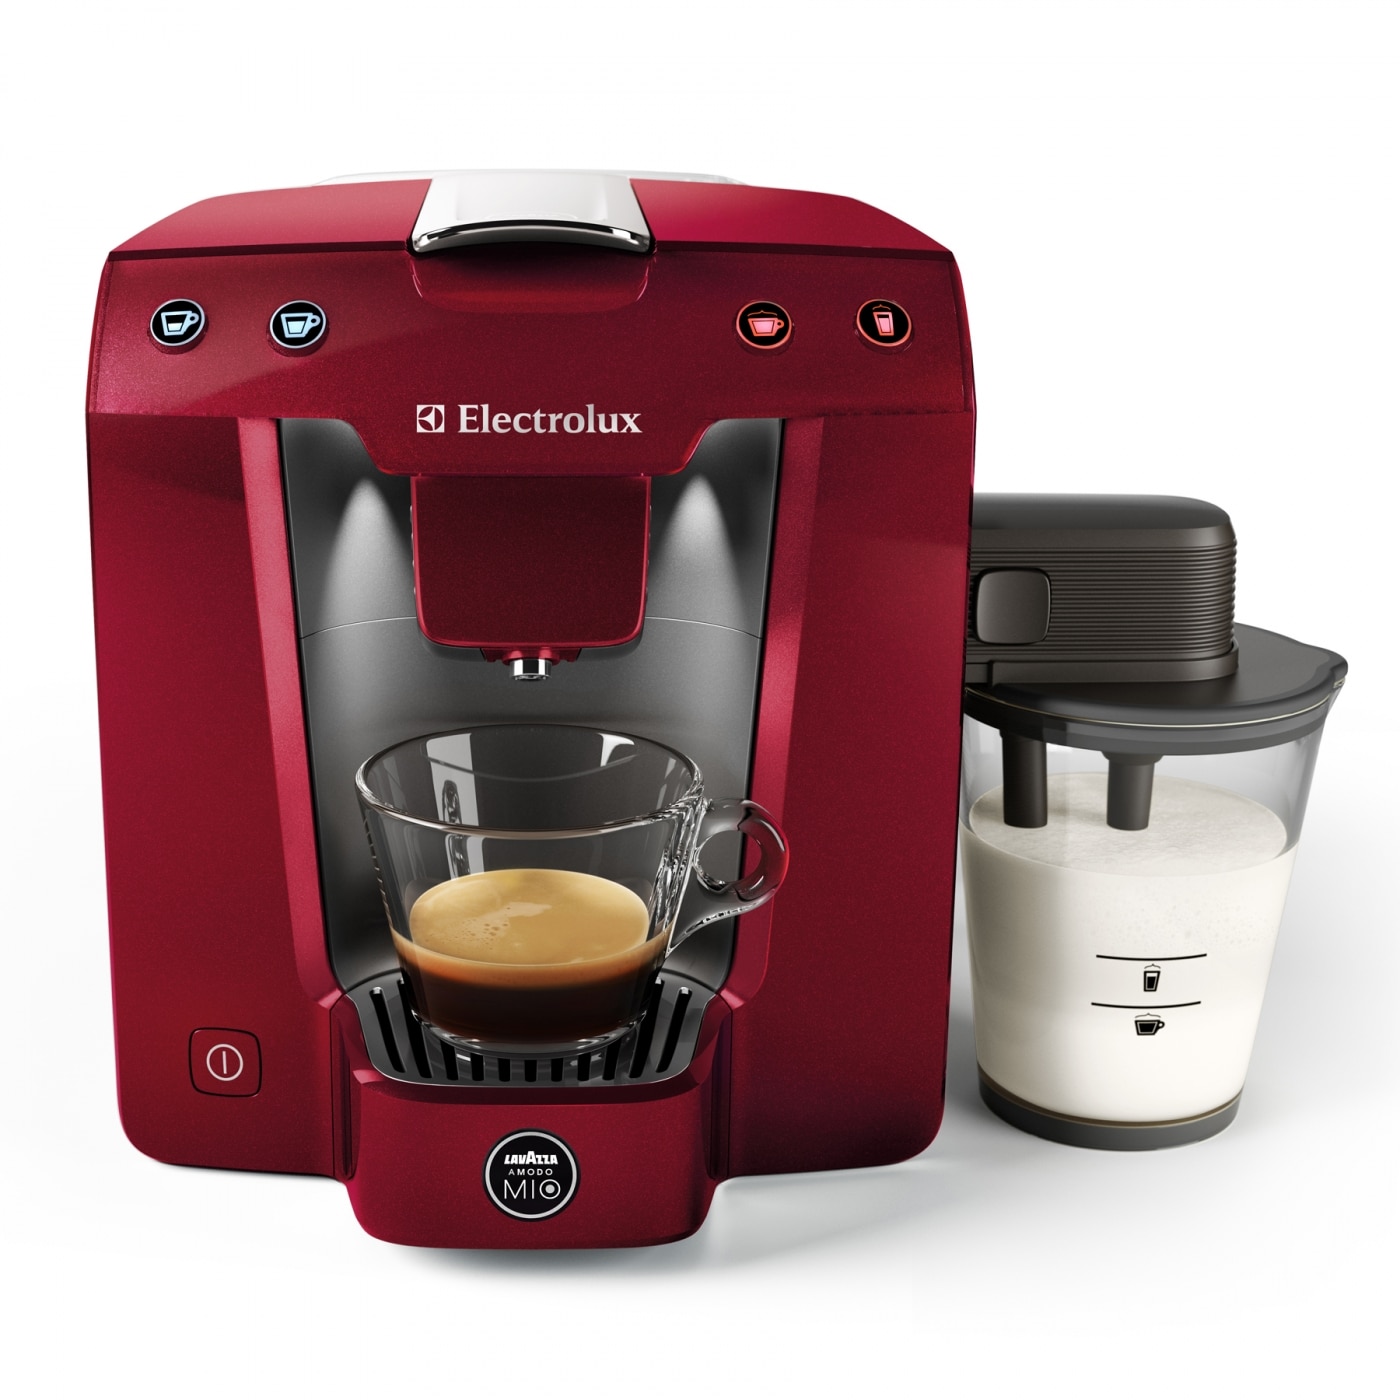 Electrolux Favola Coffee Machine Added An Innovative Milk Frothing System Electrolux Group